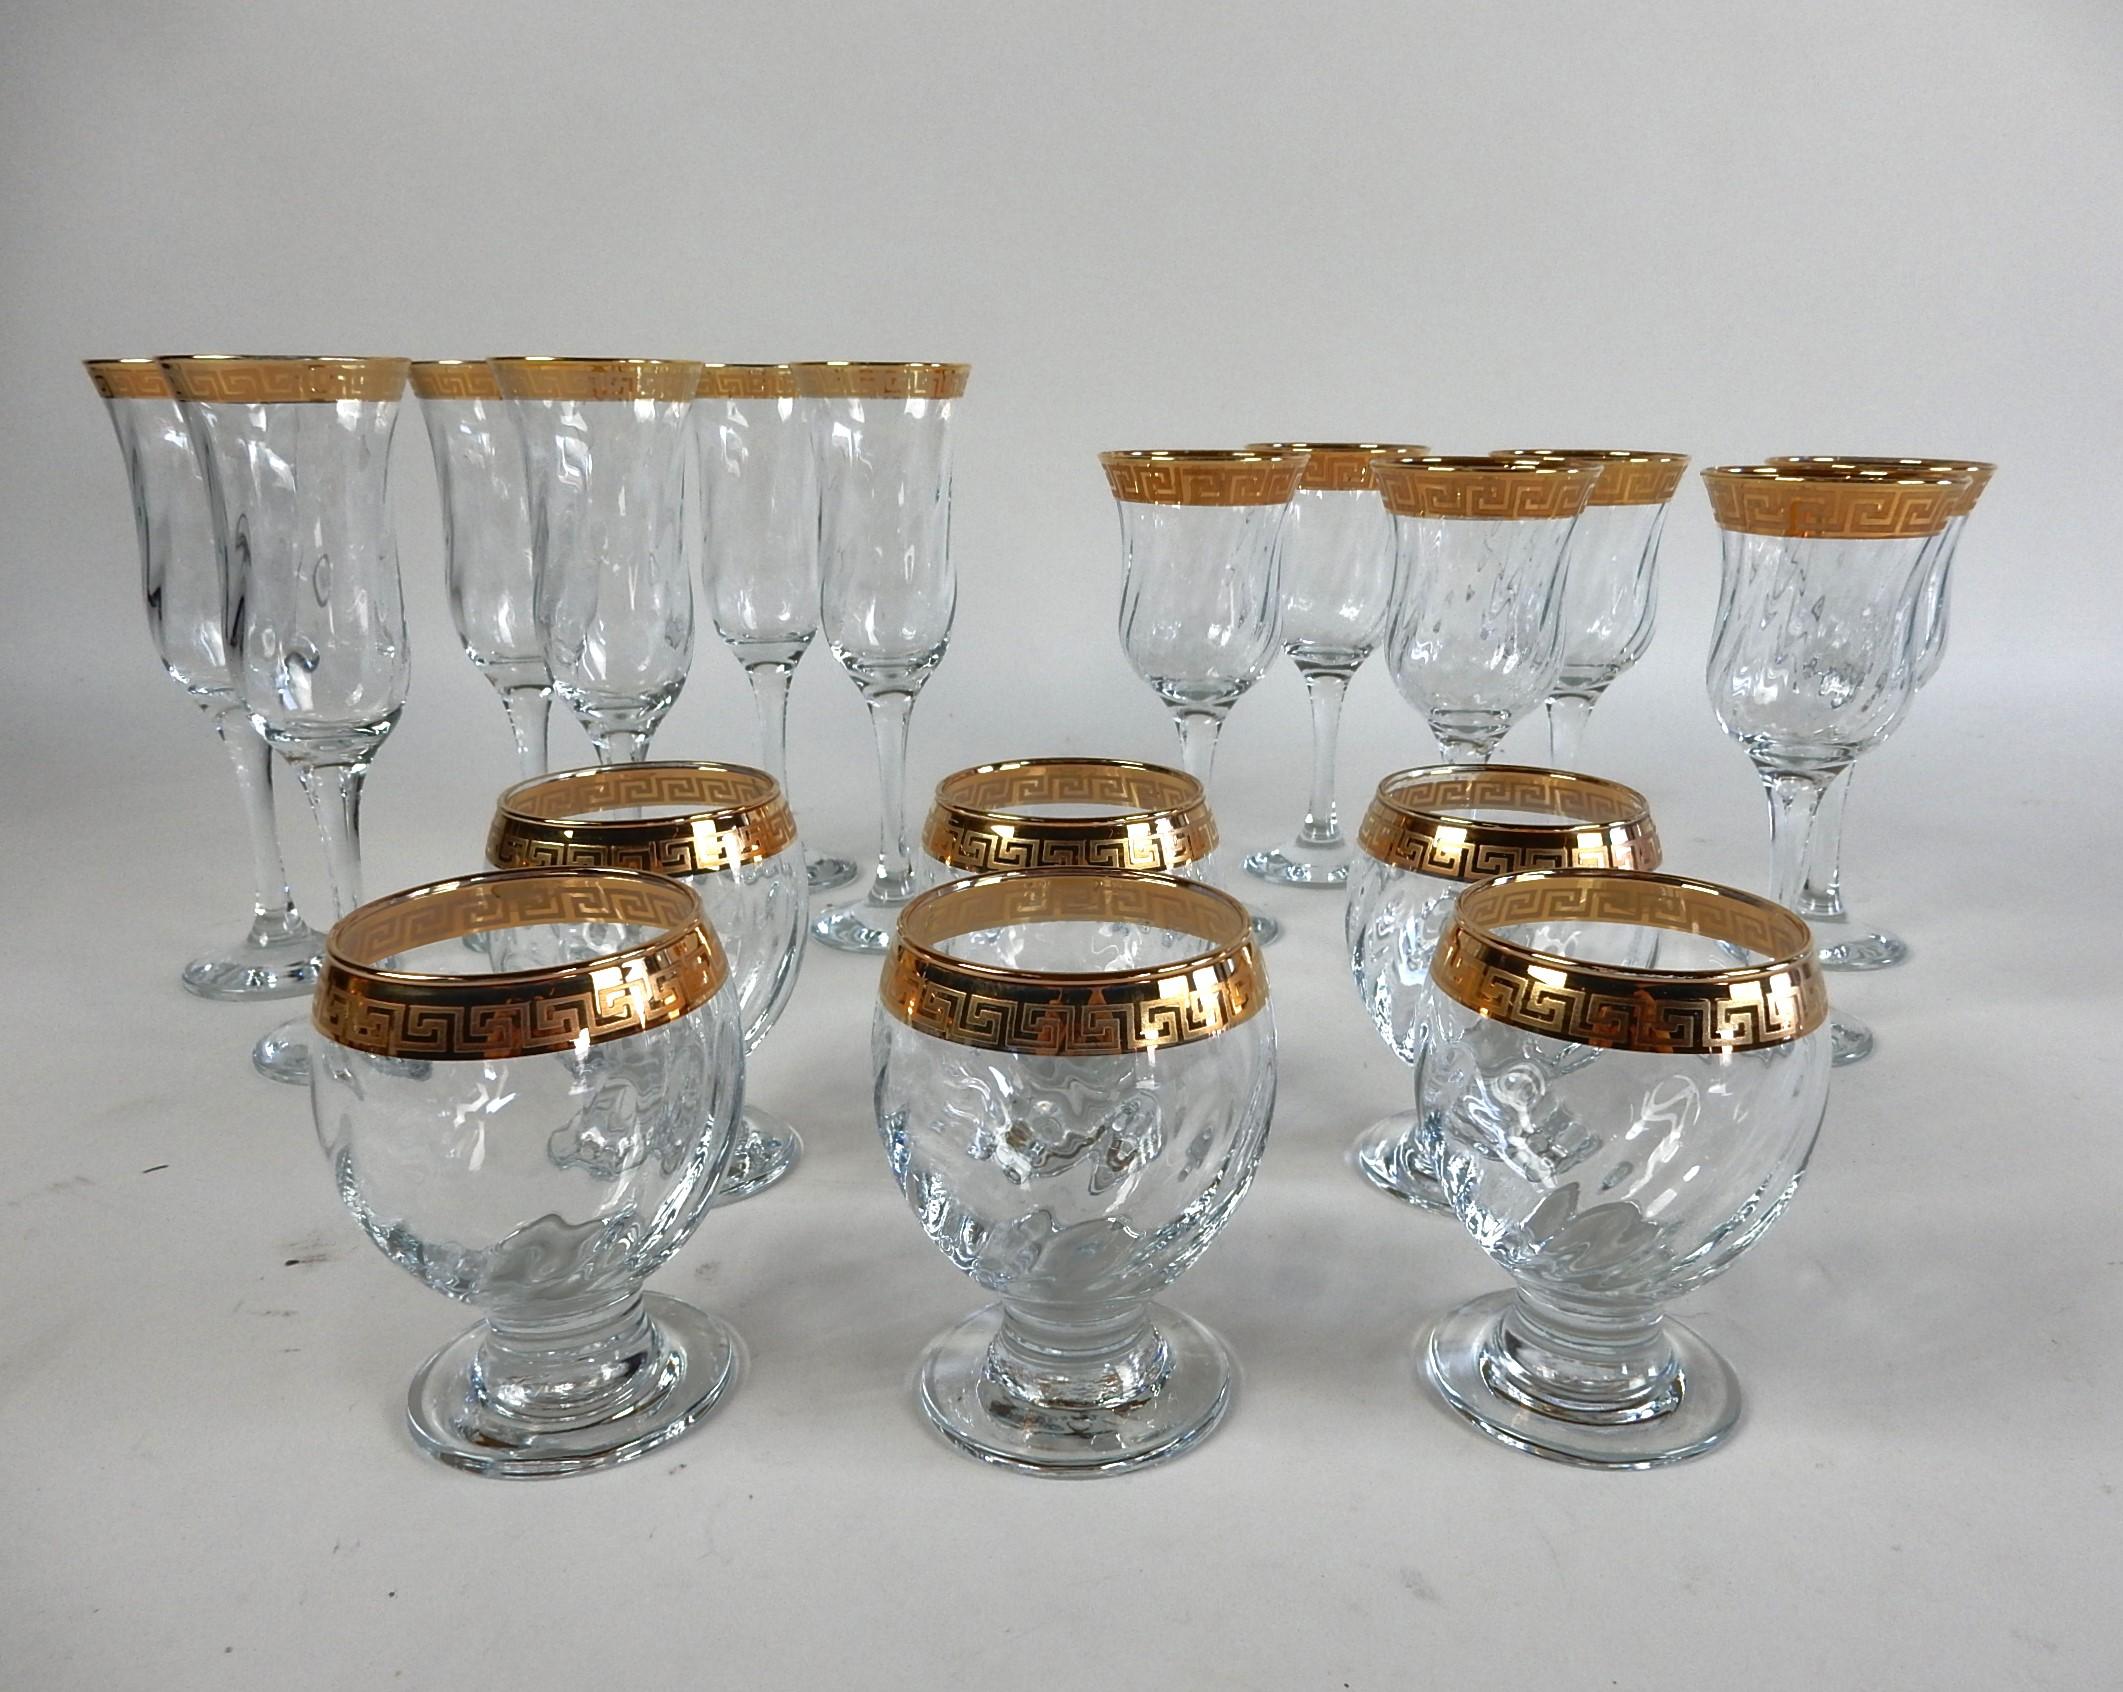 Gorgeous set of 18 bar glasses with
gold Greek Key design rims.
6 of each size, champagne, wine and rocks. 
Unbranded in the style of Versace.